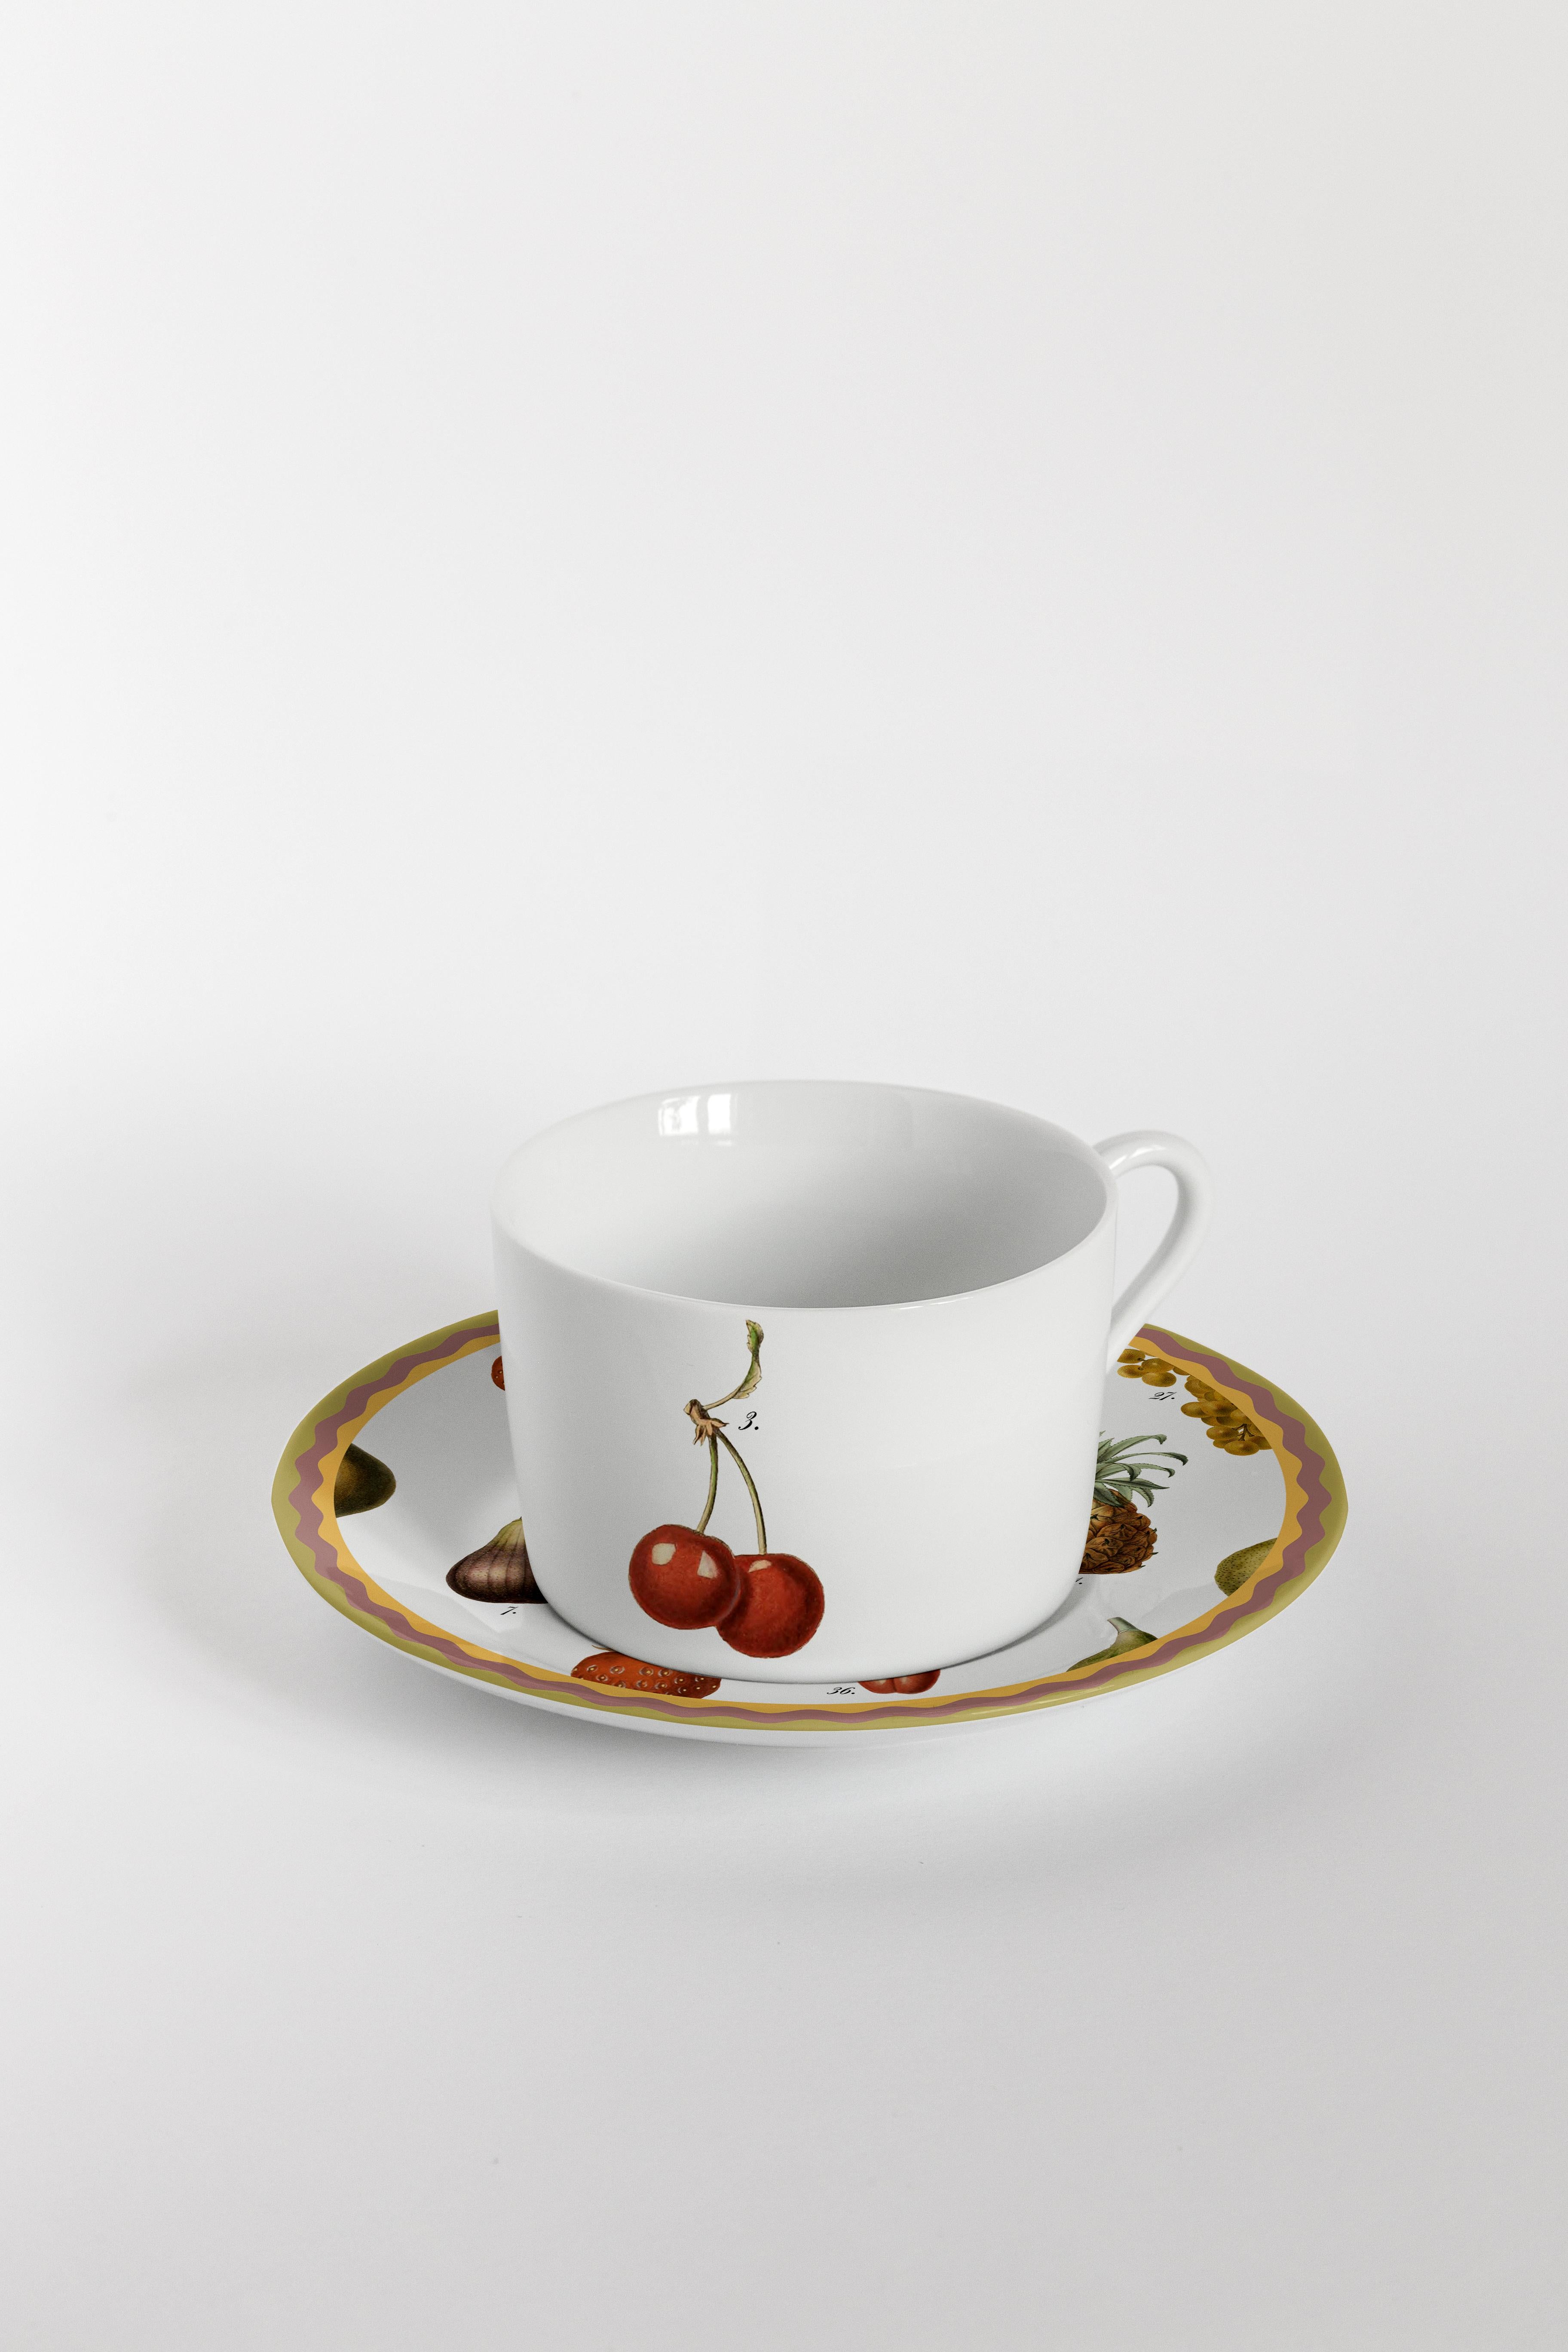 Cabinet De Curiosités, Six Contemporary Decorated Tea Cups with Plates In New Condition For Sale In Milano, Lombardia